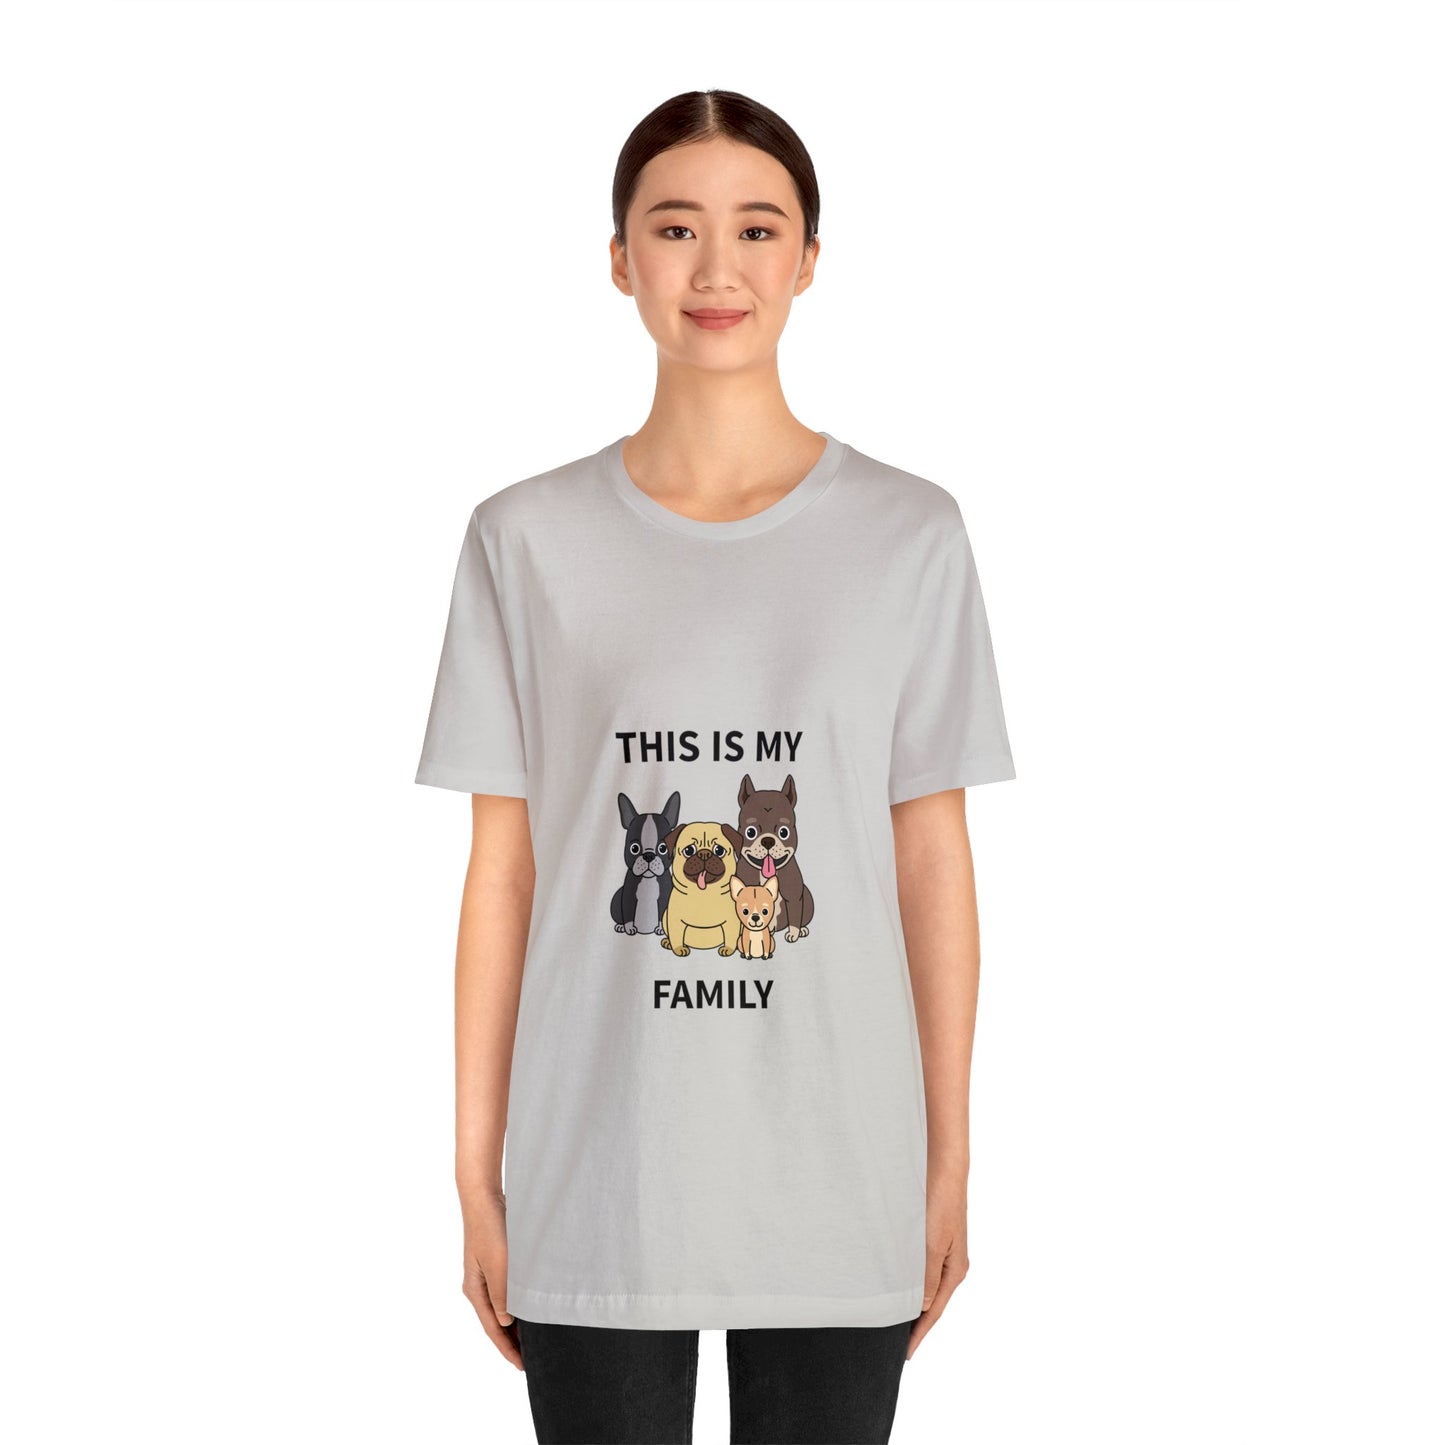 This is My Family Unisex Jersey Short Sleeve Tee - Pet Lovers